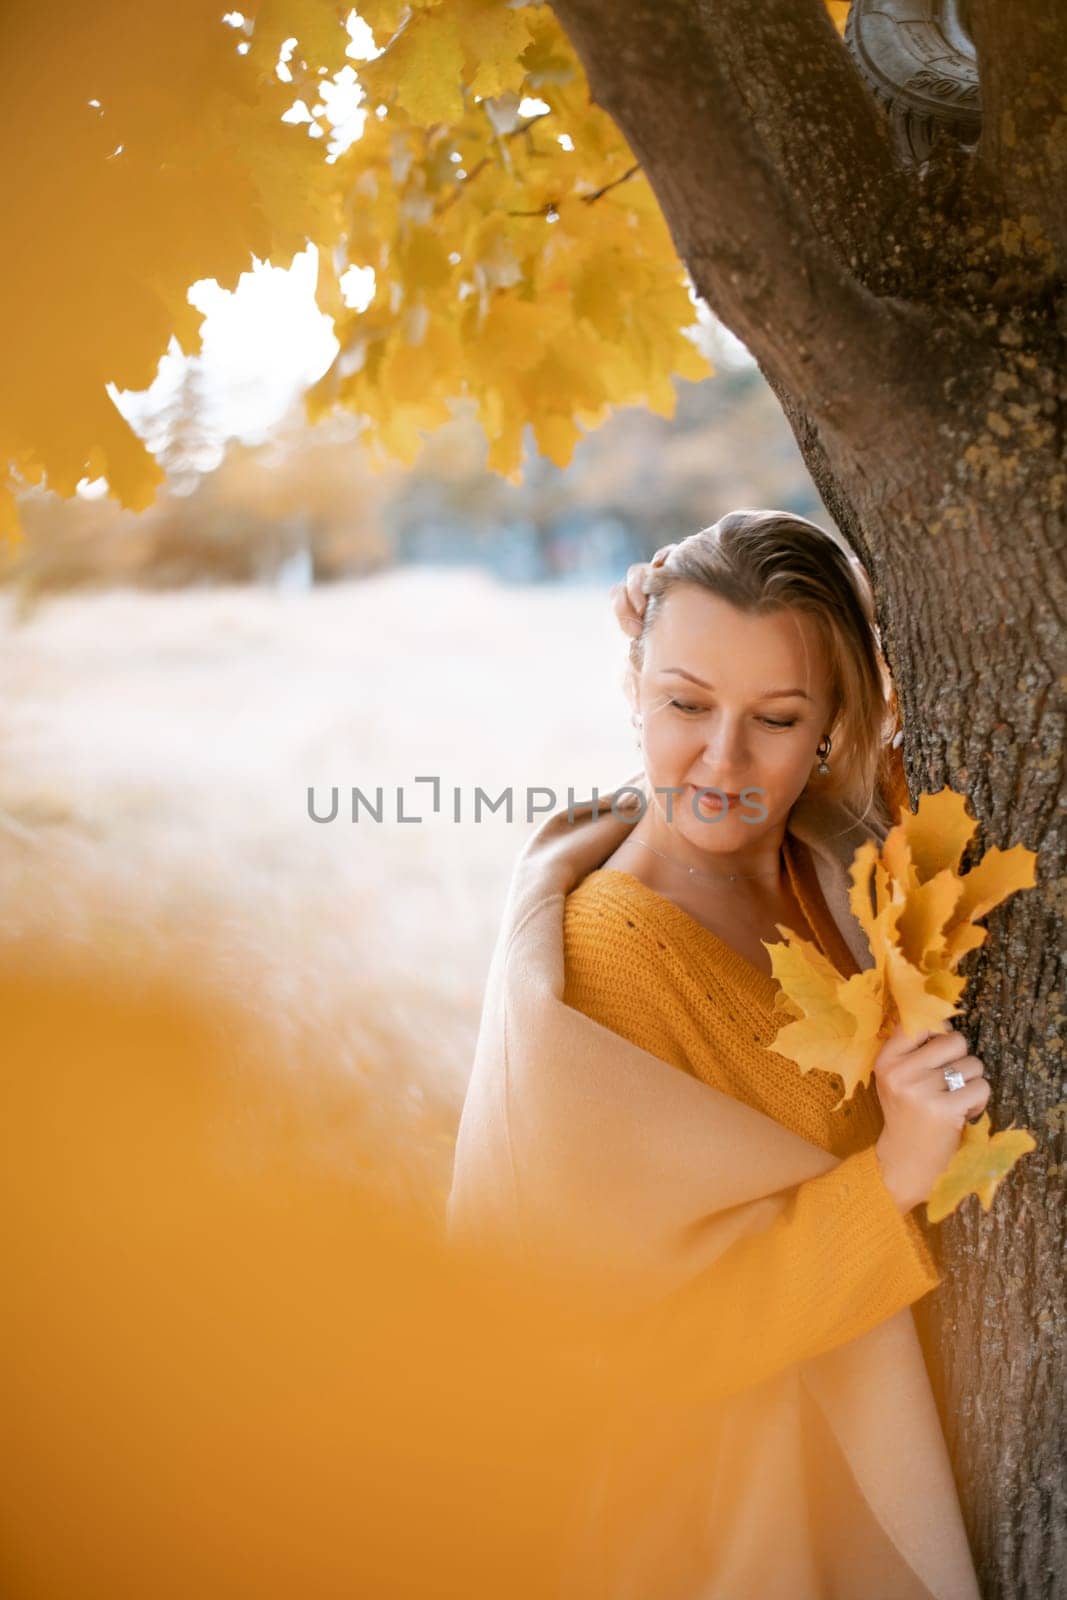 The blonde stands near the autumn tree. Thoughtful woman looks ahead, dressed in a yellow dress. Autumn content by Matiunina